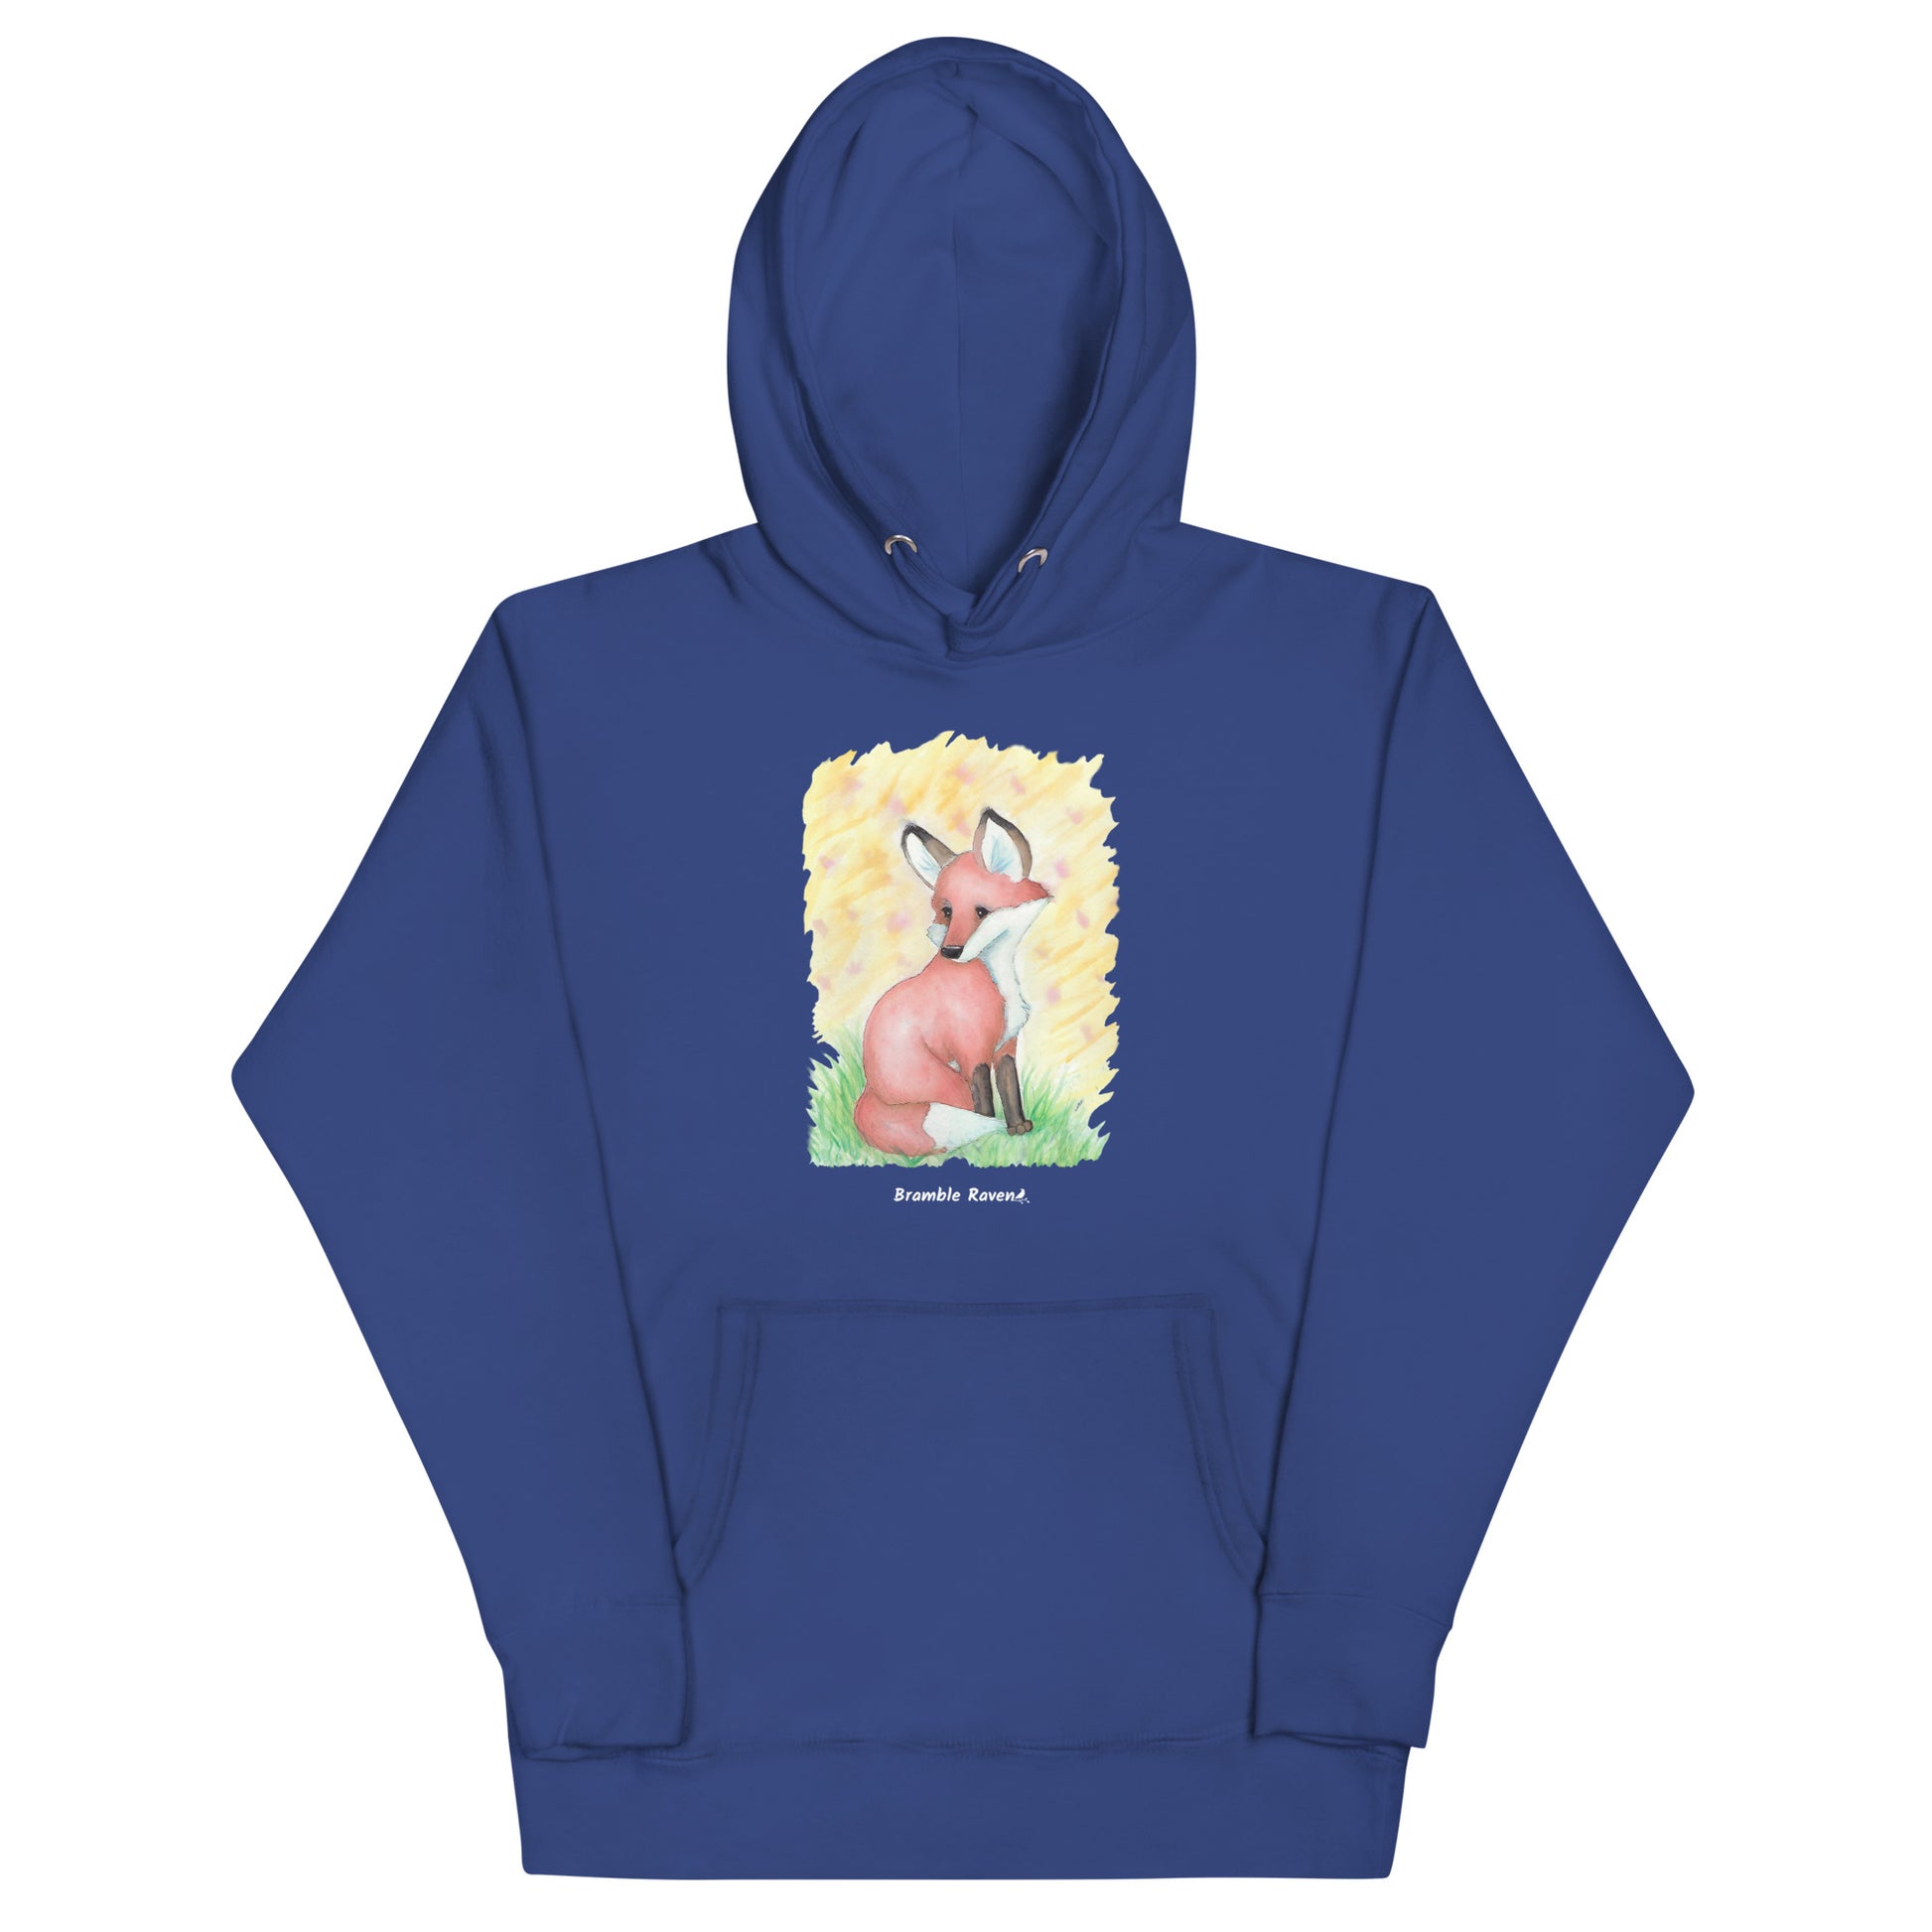 Unisex royal blue colored hoodie. Features original watercolor painting of a fox in the grass against a yellow backdrop.